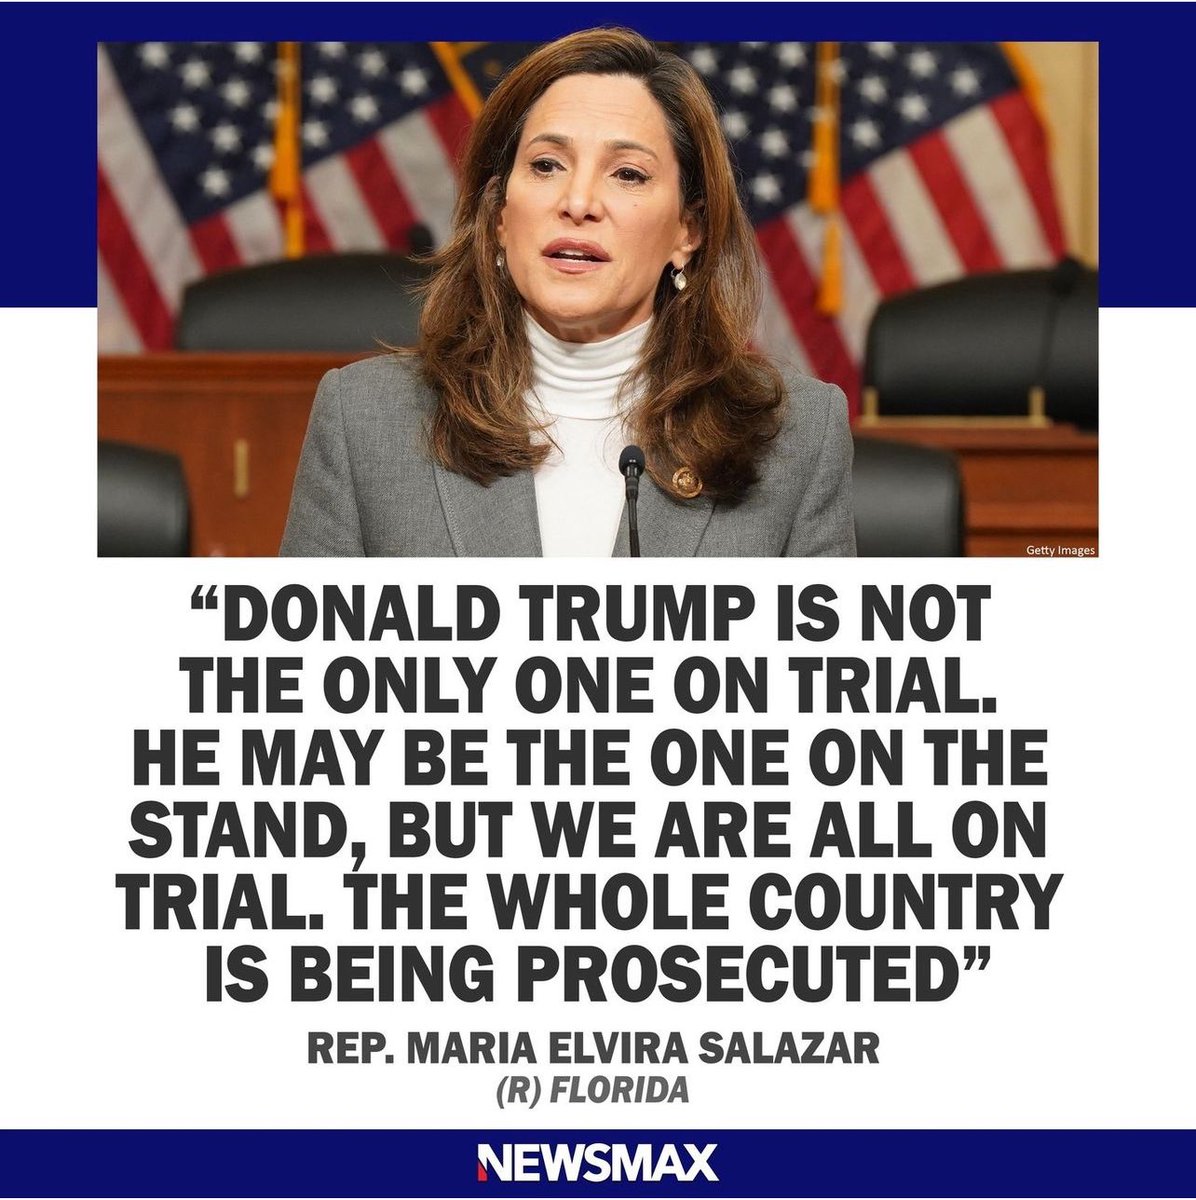 We all on trial, do you agree with Elvira Salazar, if yes repost ! @x4Eileen @cmir_r @_djtII @dsware123 @DrF8162 @brindleh @827js @HPY2KW @RDog861 @Bagel69er @ron_starr1947 @45johnmac @TrueJMitchell @Mikedknight @V_Lady2024 @th1_thr1 @1109Patricia @MbGaUSA @Lynnebf_2846